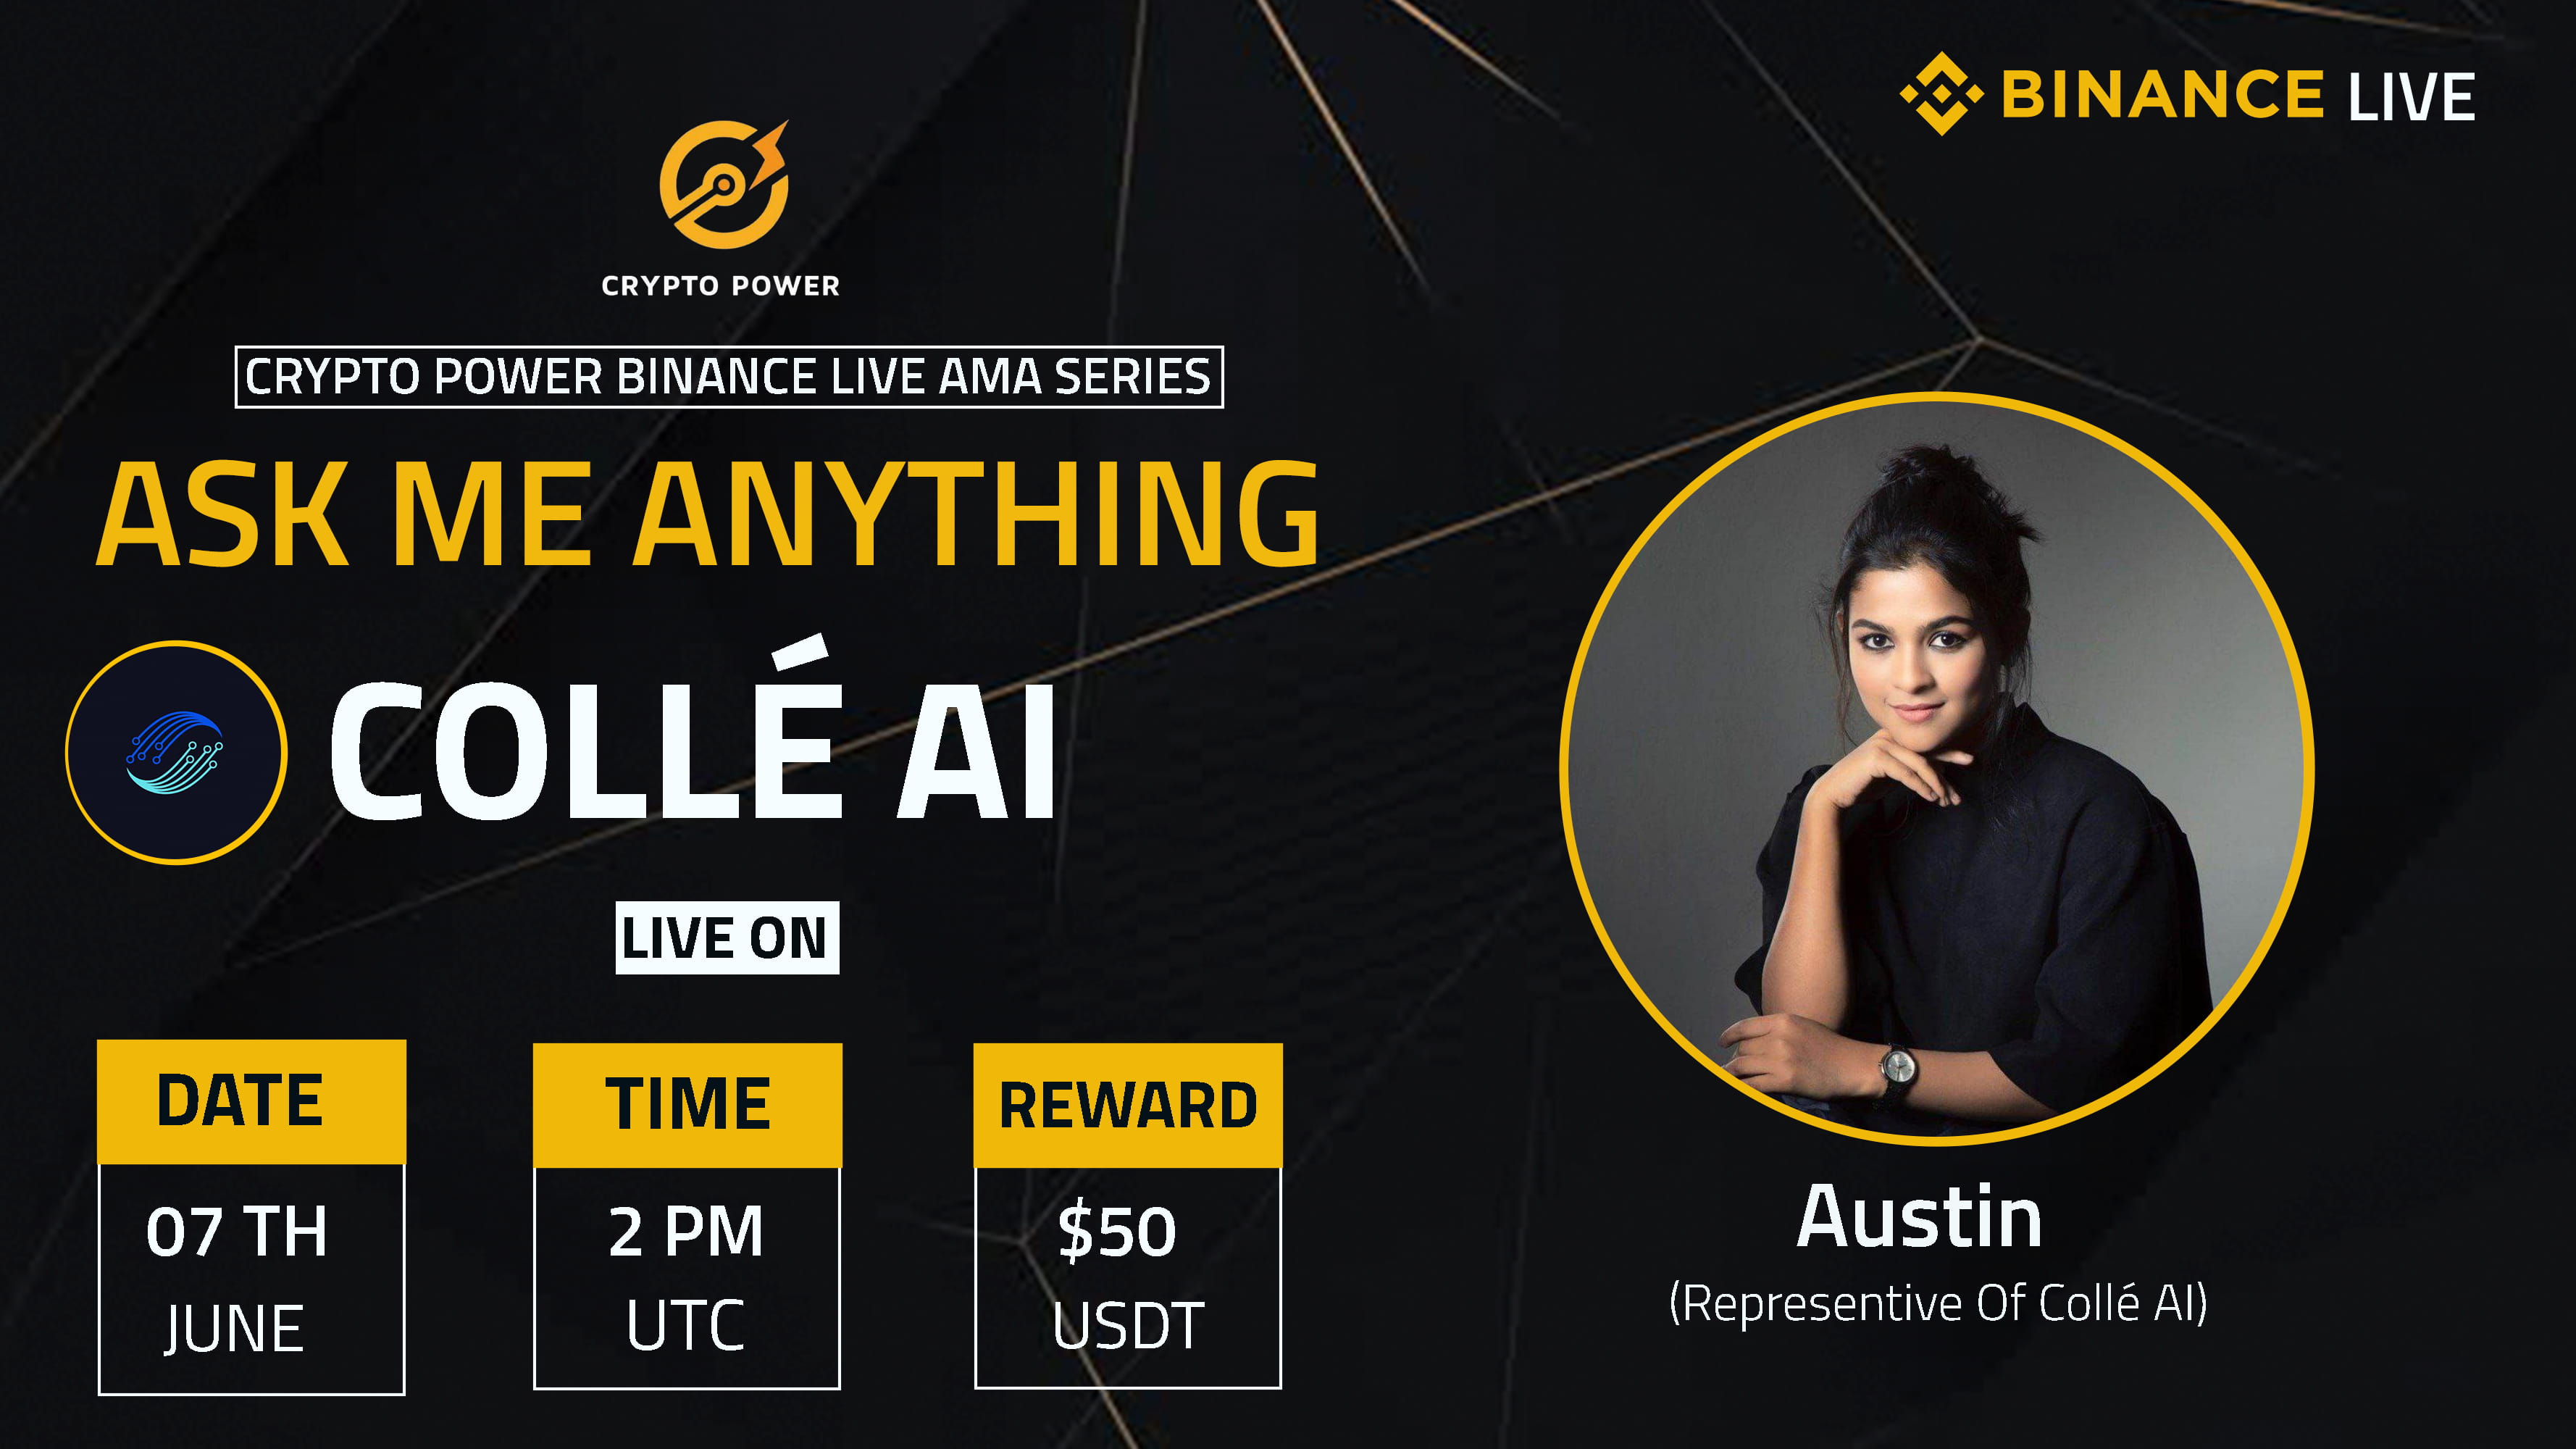 CRYPTO POWER AMA WITH COLLE AI